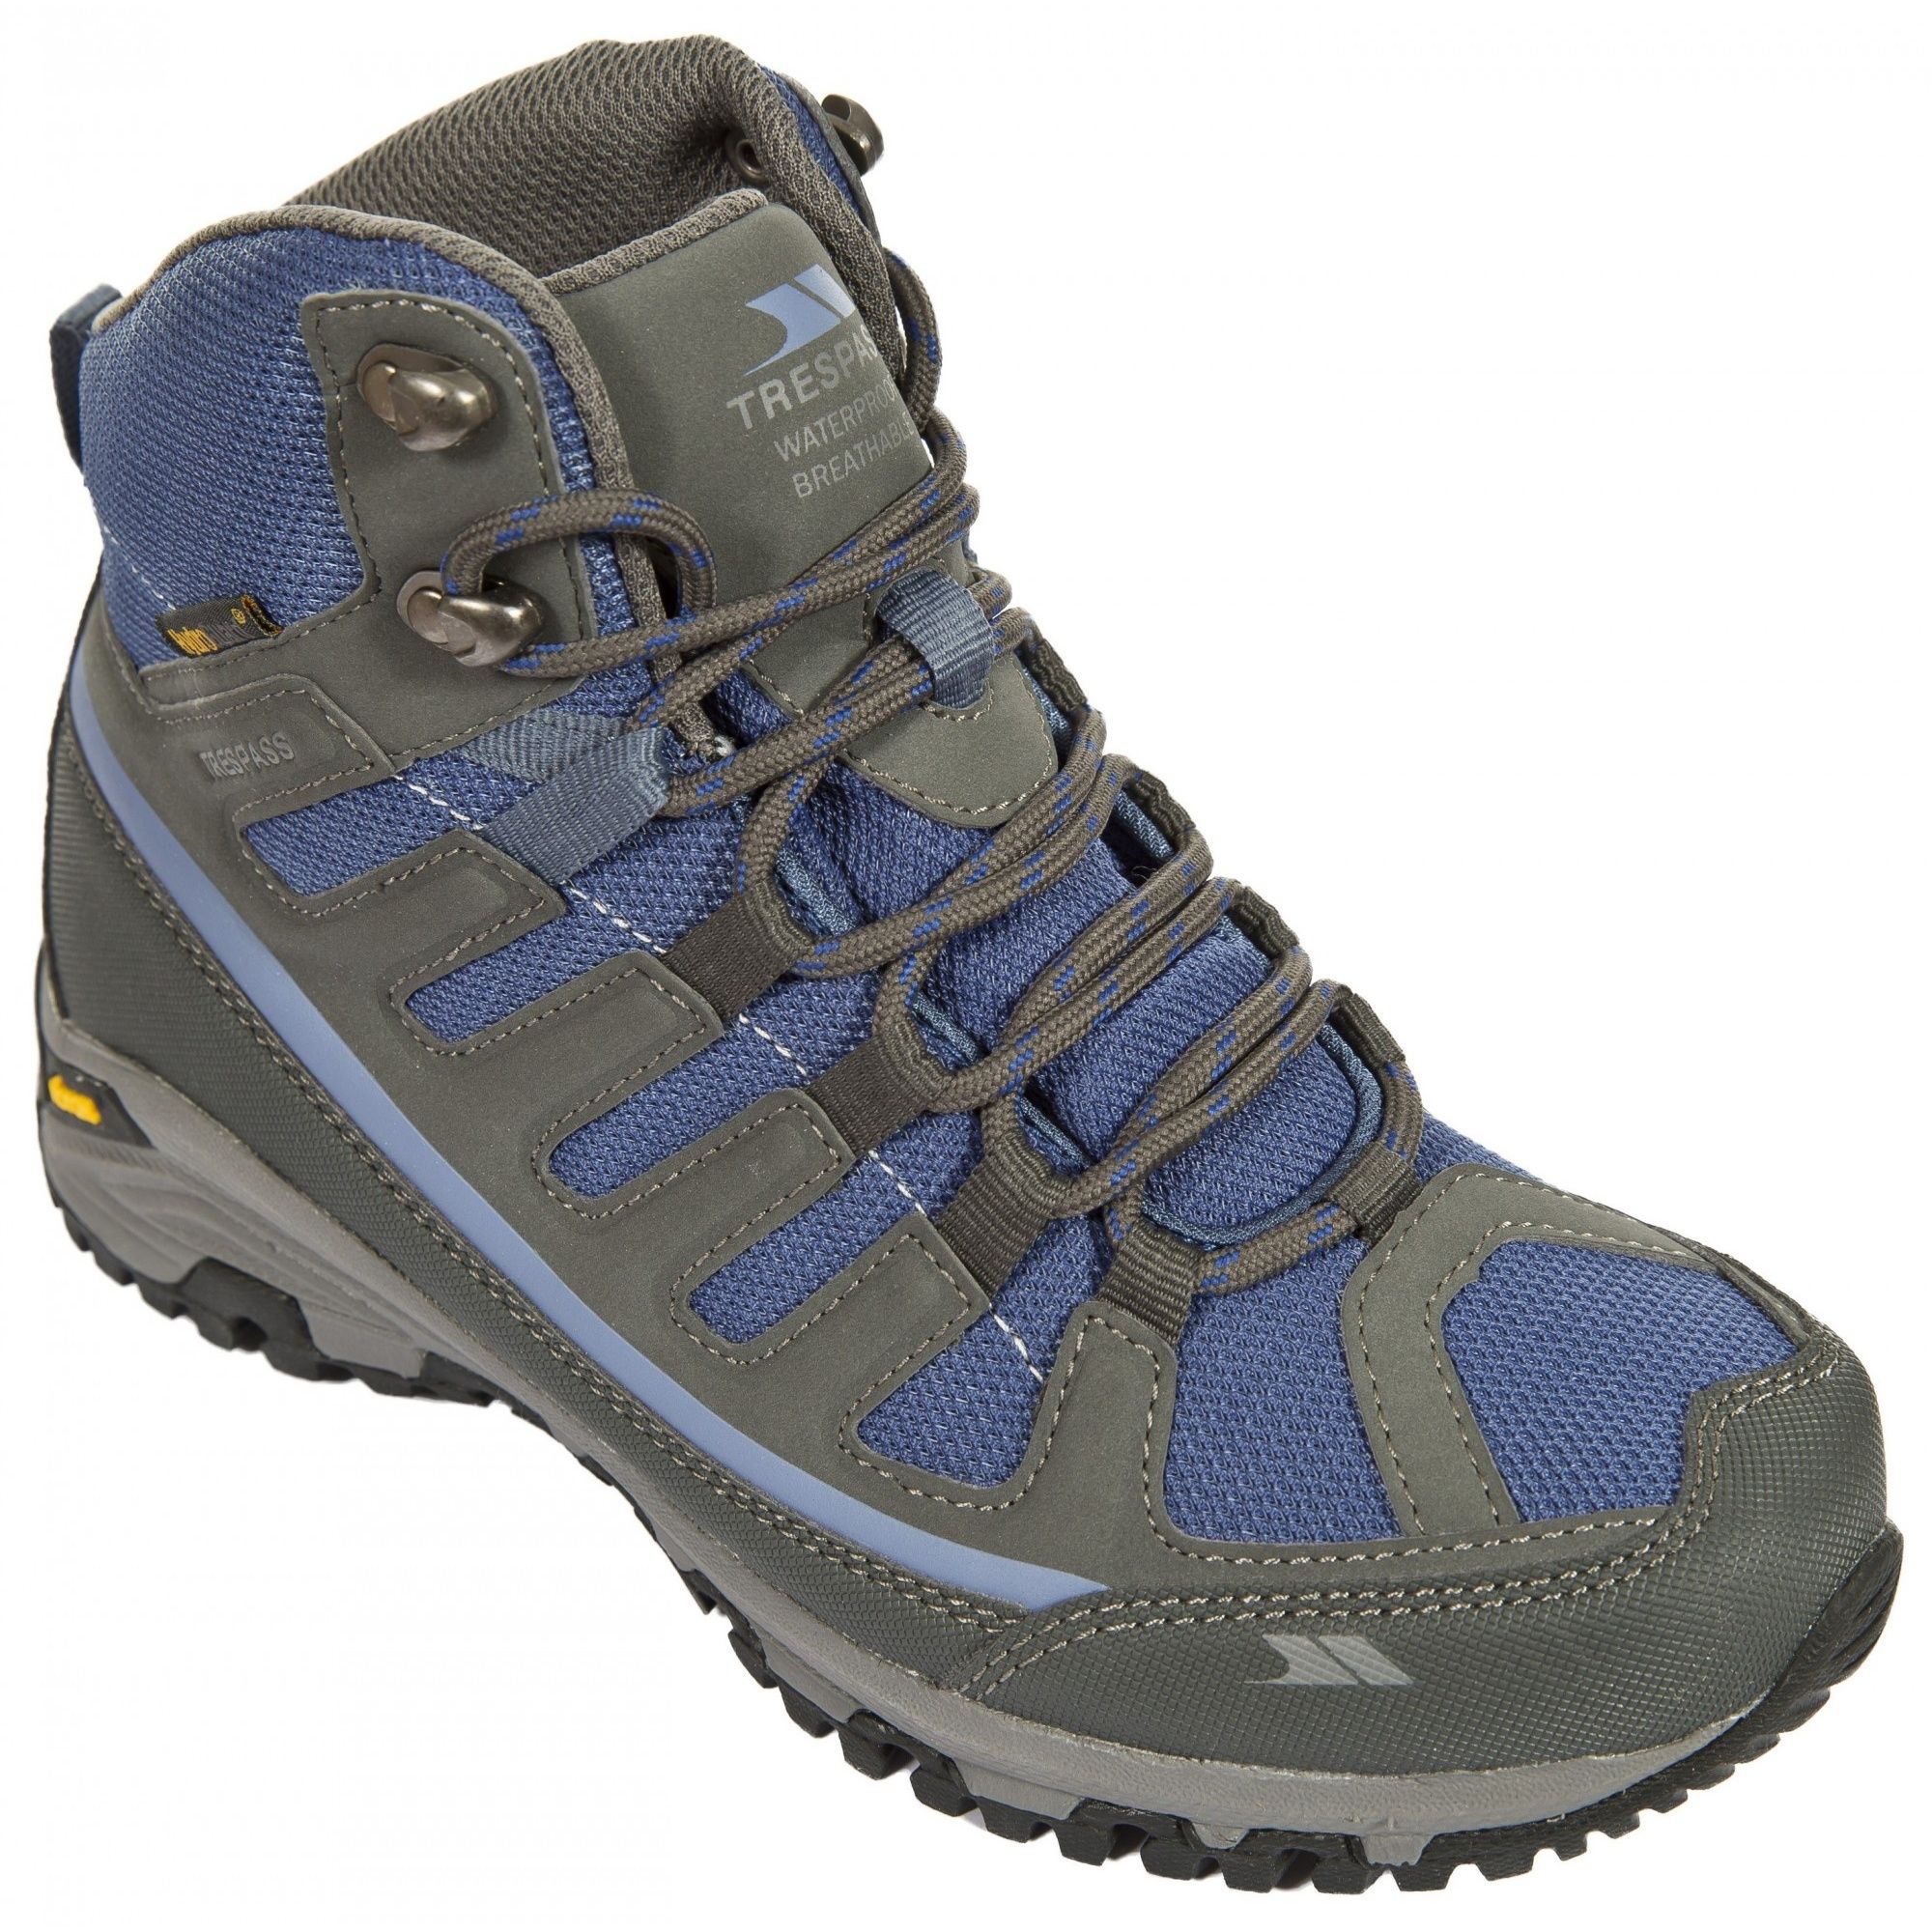 Womens mid cut hiking boot. Waterproof and breathable membrane. Gusseted tongue. Protective and durable all-round mudguard. Ankle supportive cushioned collar and tongue. Arch stabilising and supportive shank. Cushioned footbed. Upper: PU, textile, Lining: textile, Outsole: vibram-moulded EVA, phylon rubber.